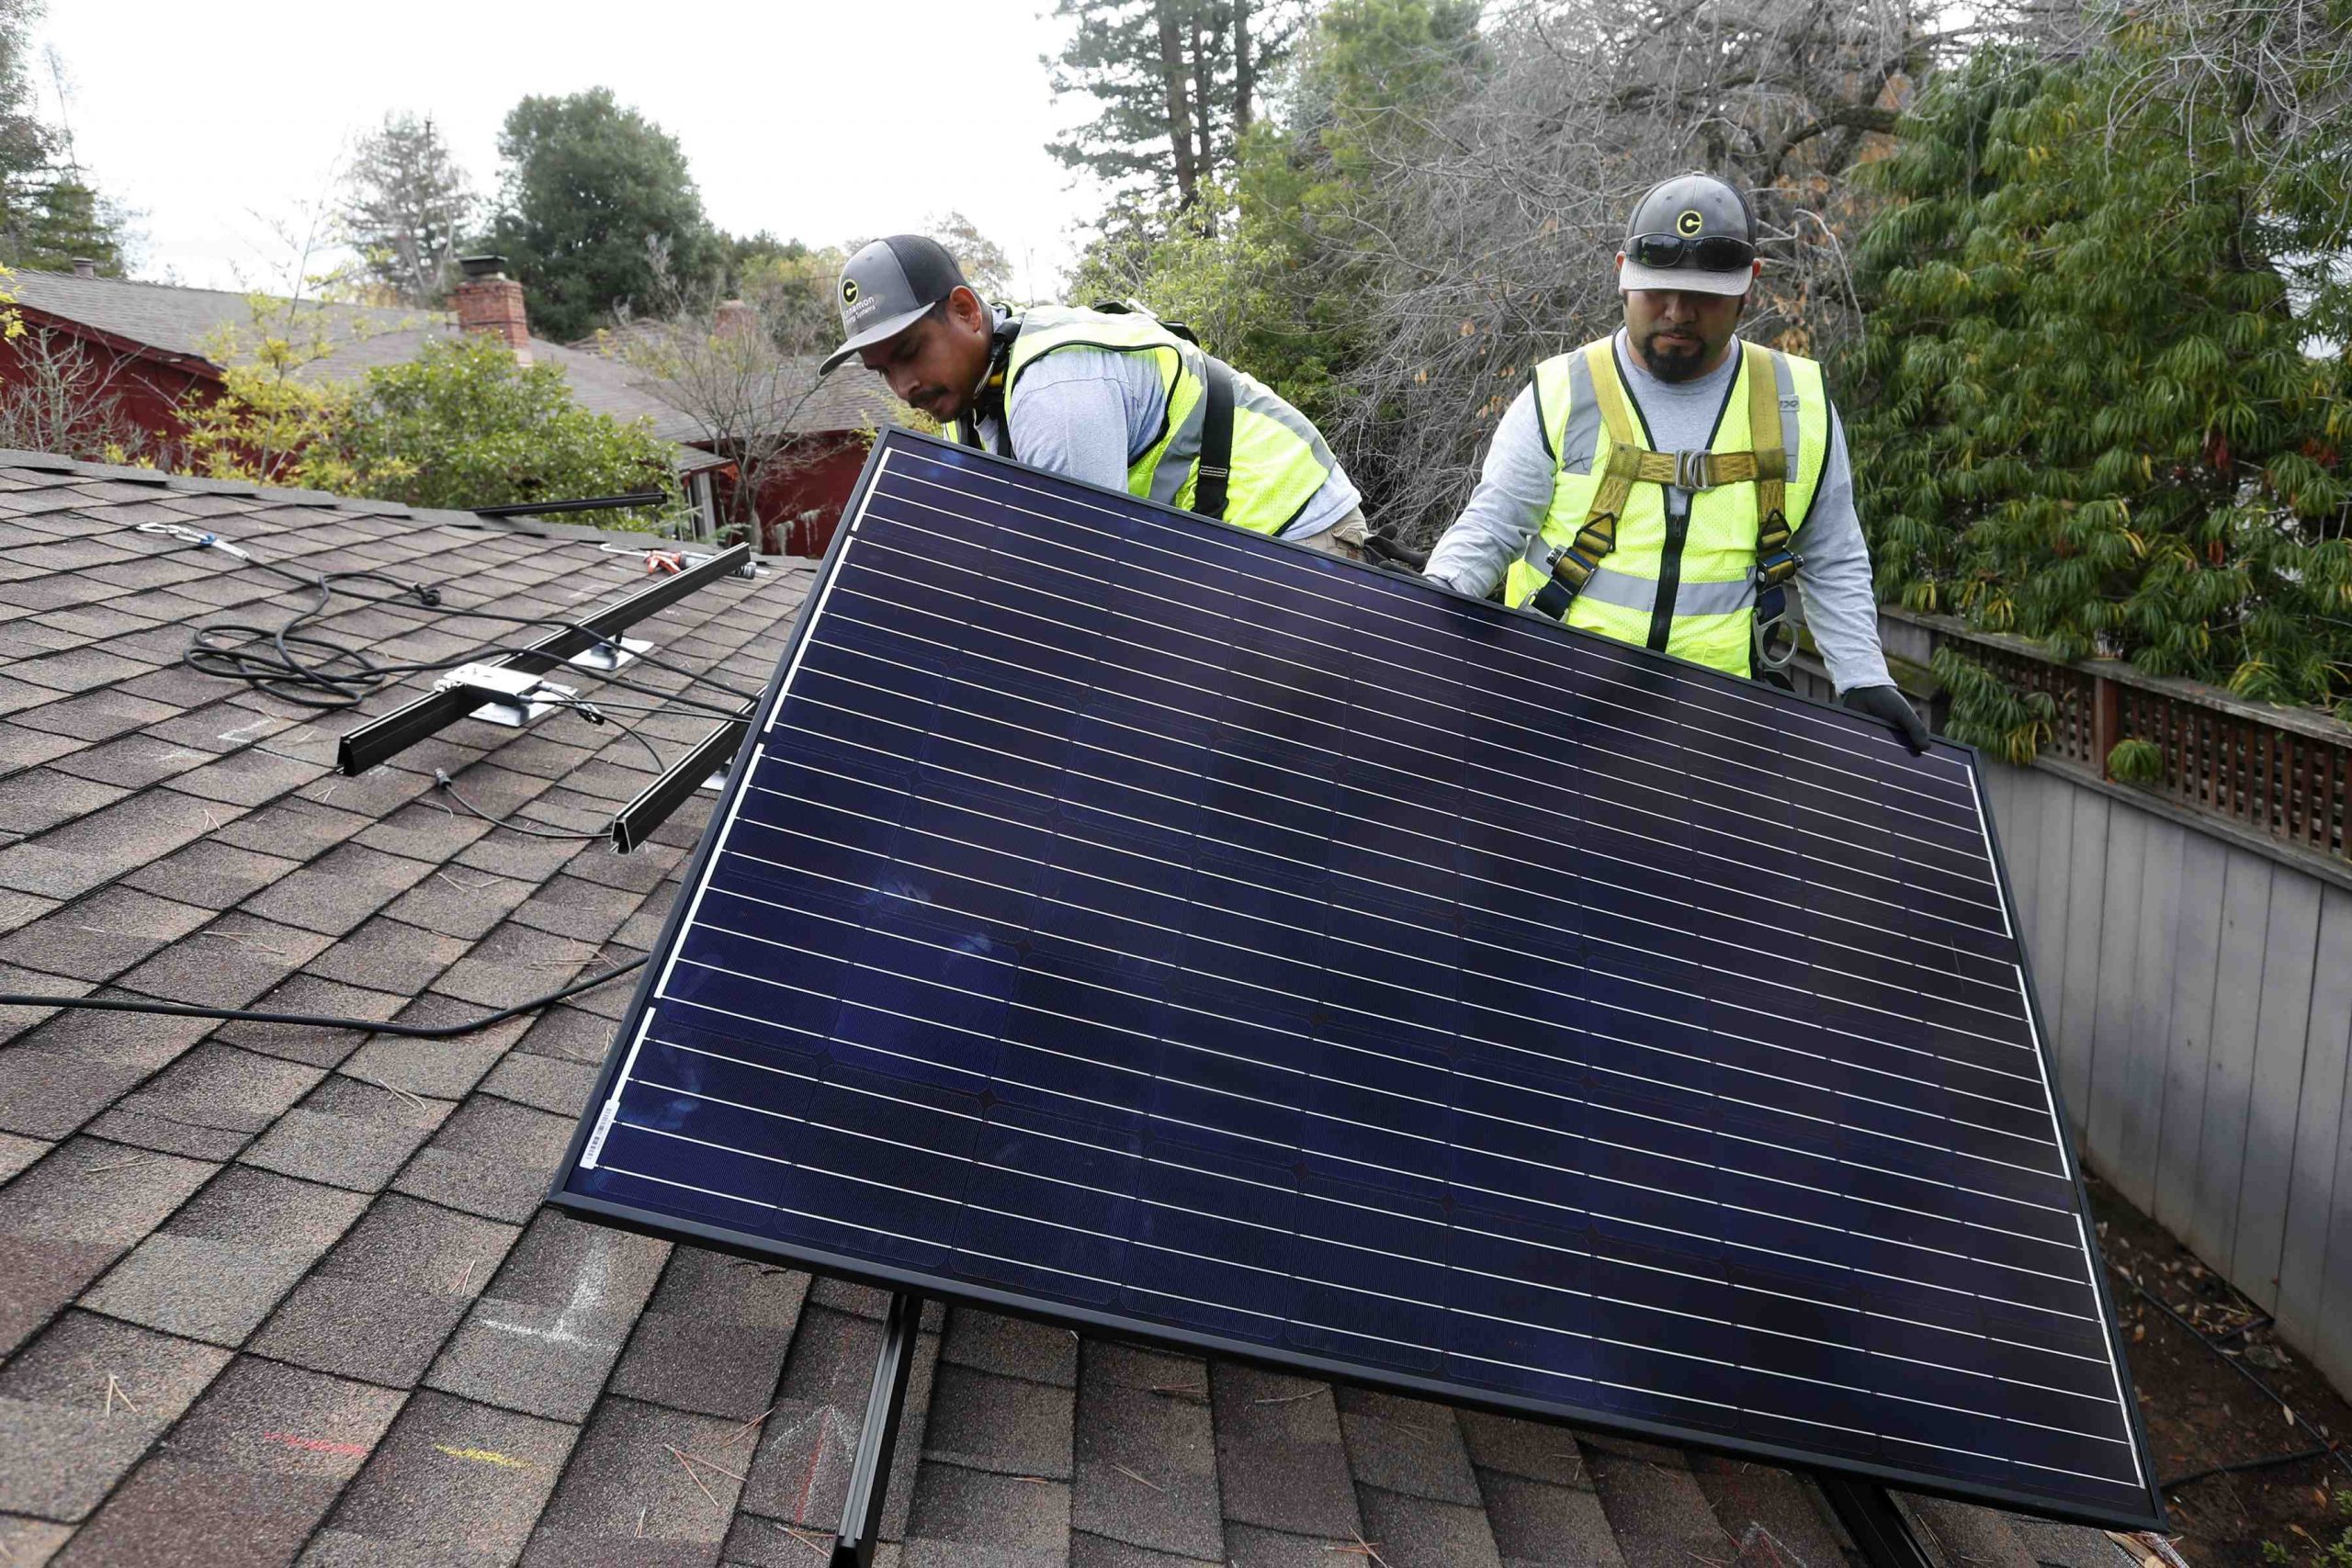 Why are new homes not fitted with solar panels?